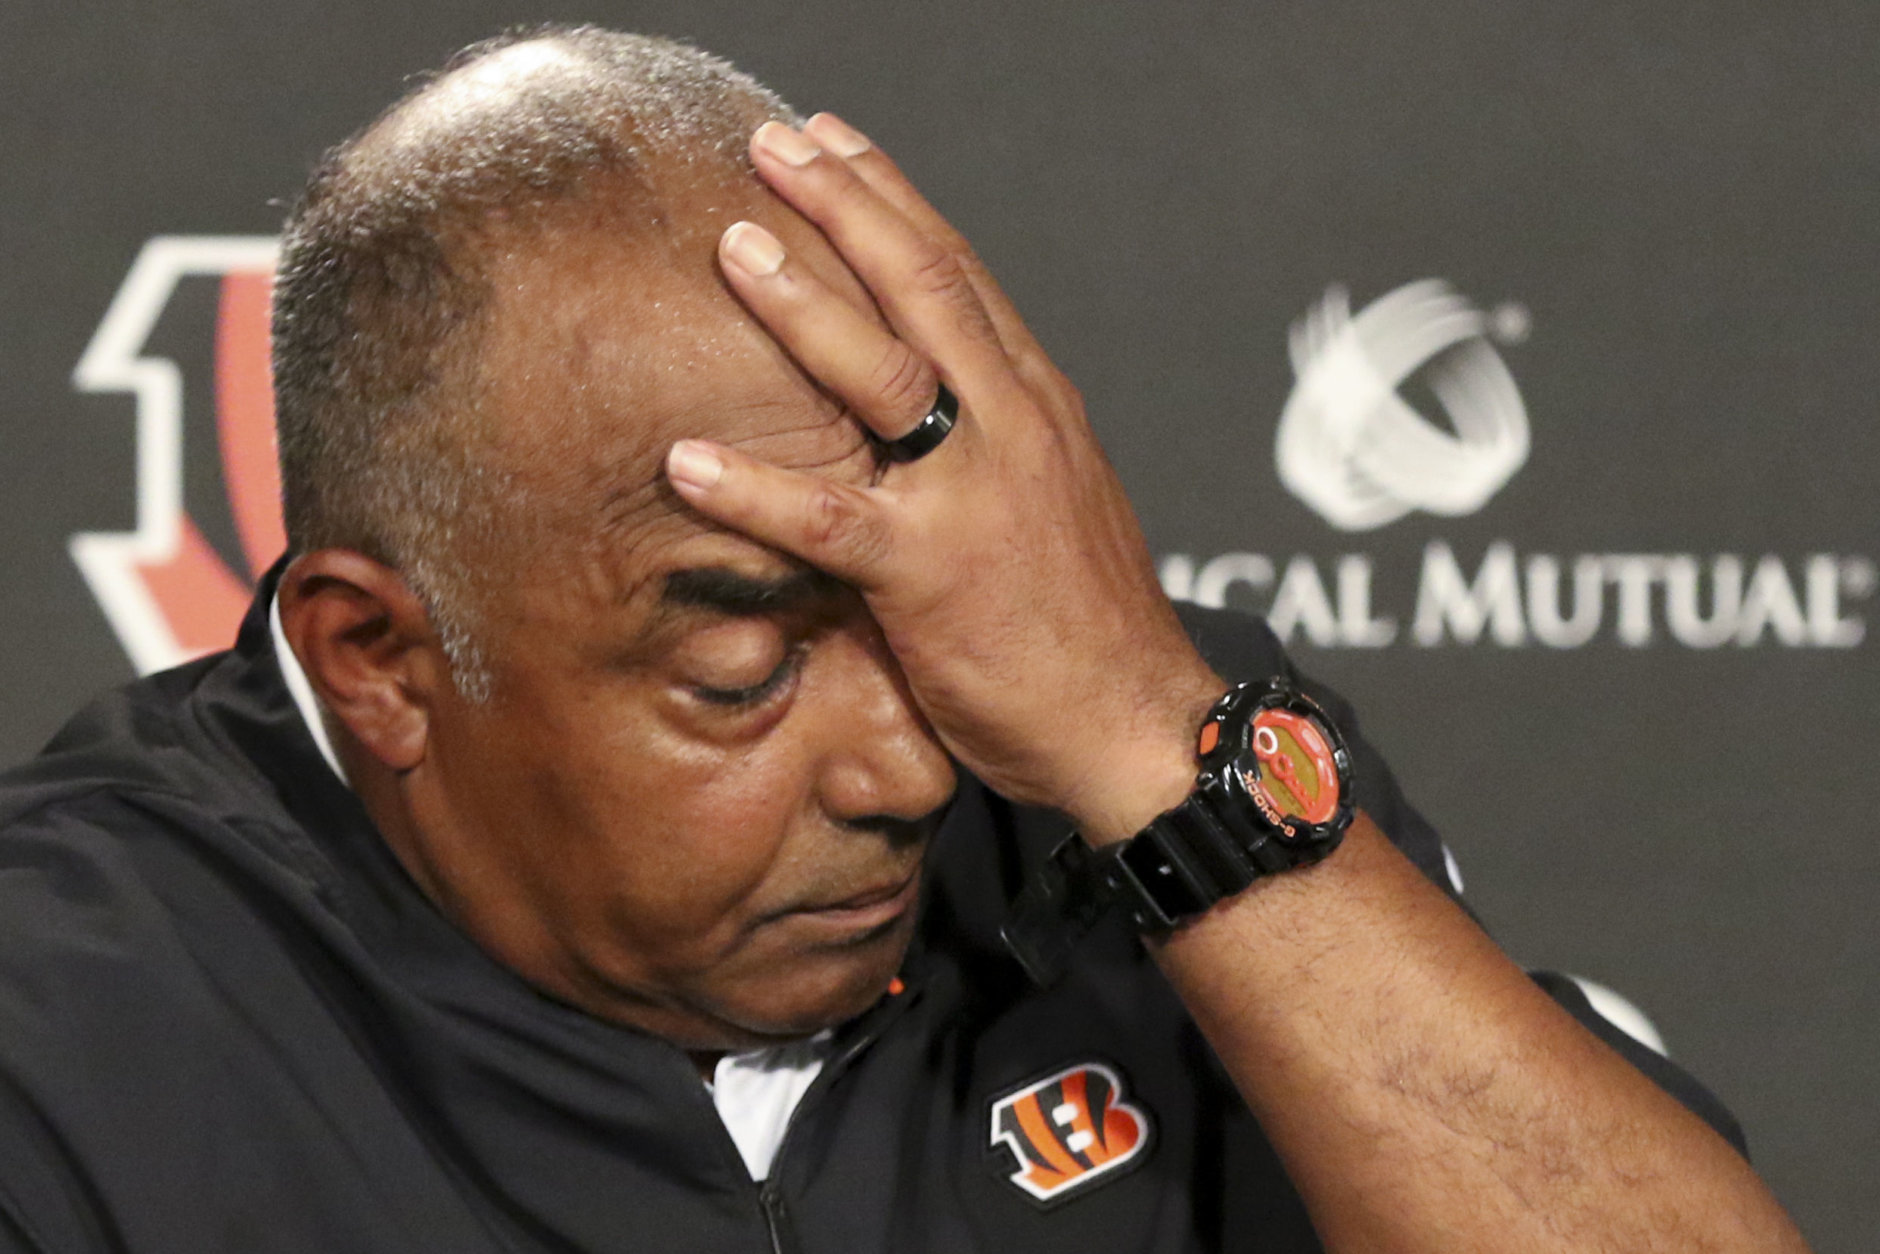 Cincinnati Bengals head coach Marvin Lewis reacts during a news conference after an NFL preseason football game against the Indianapolis Colts, Thursday, Aug. 30, 2018, in Cincinnati. (AP Photo/Gary Landers)